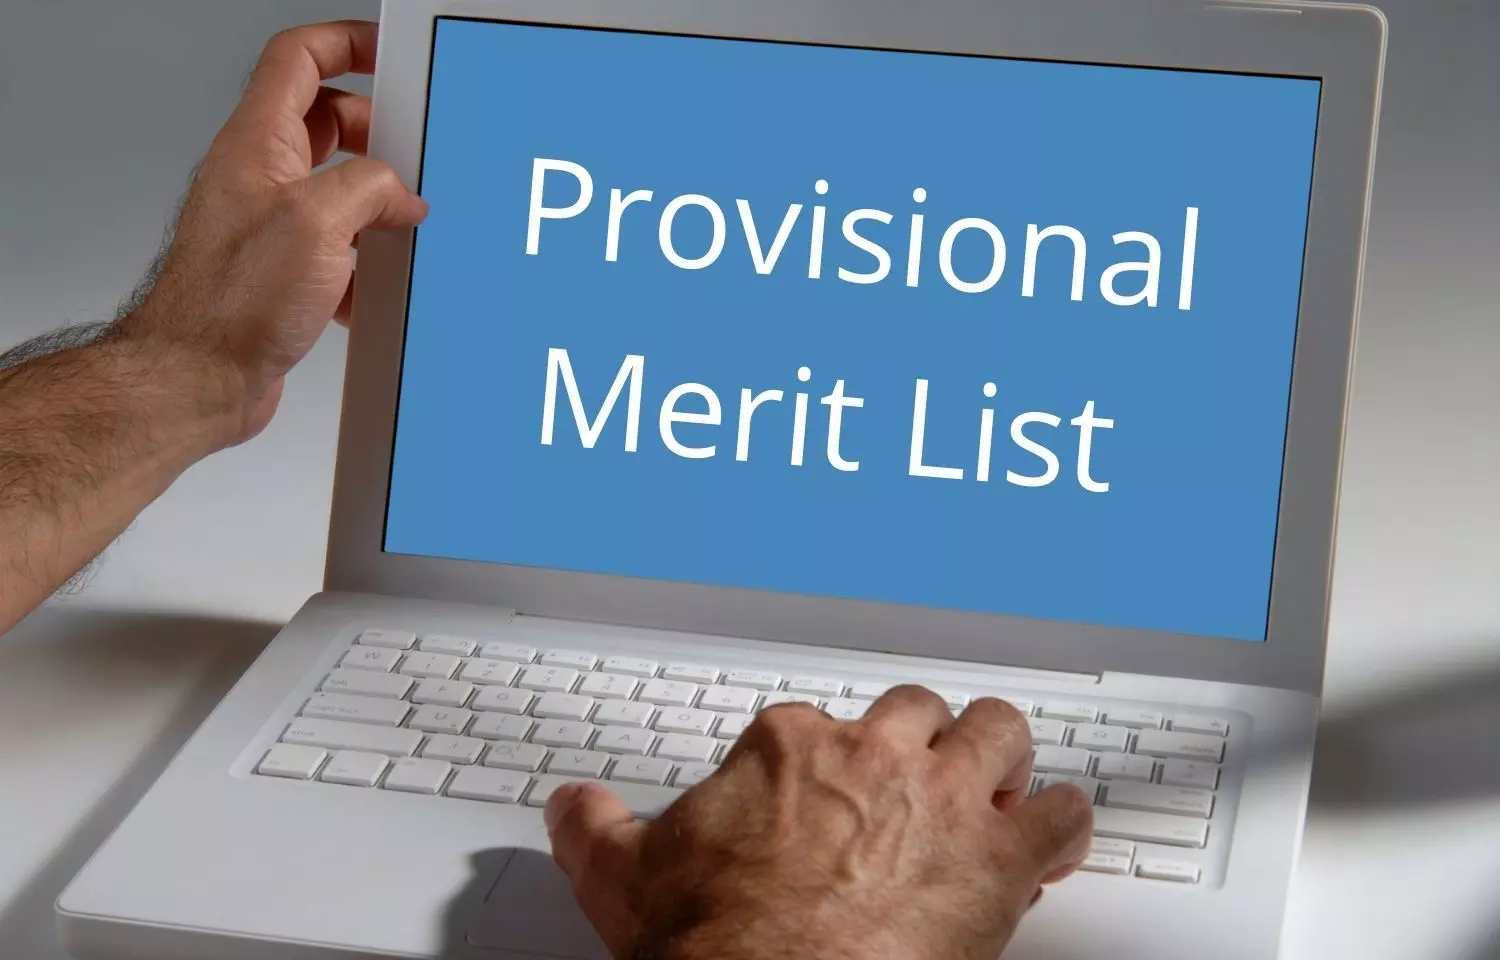 DME Tripura Releases Provisional Merit list Of NEET PG 2022 Round 1 Counselling, Details